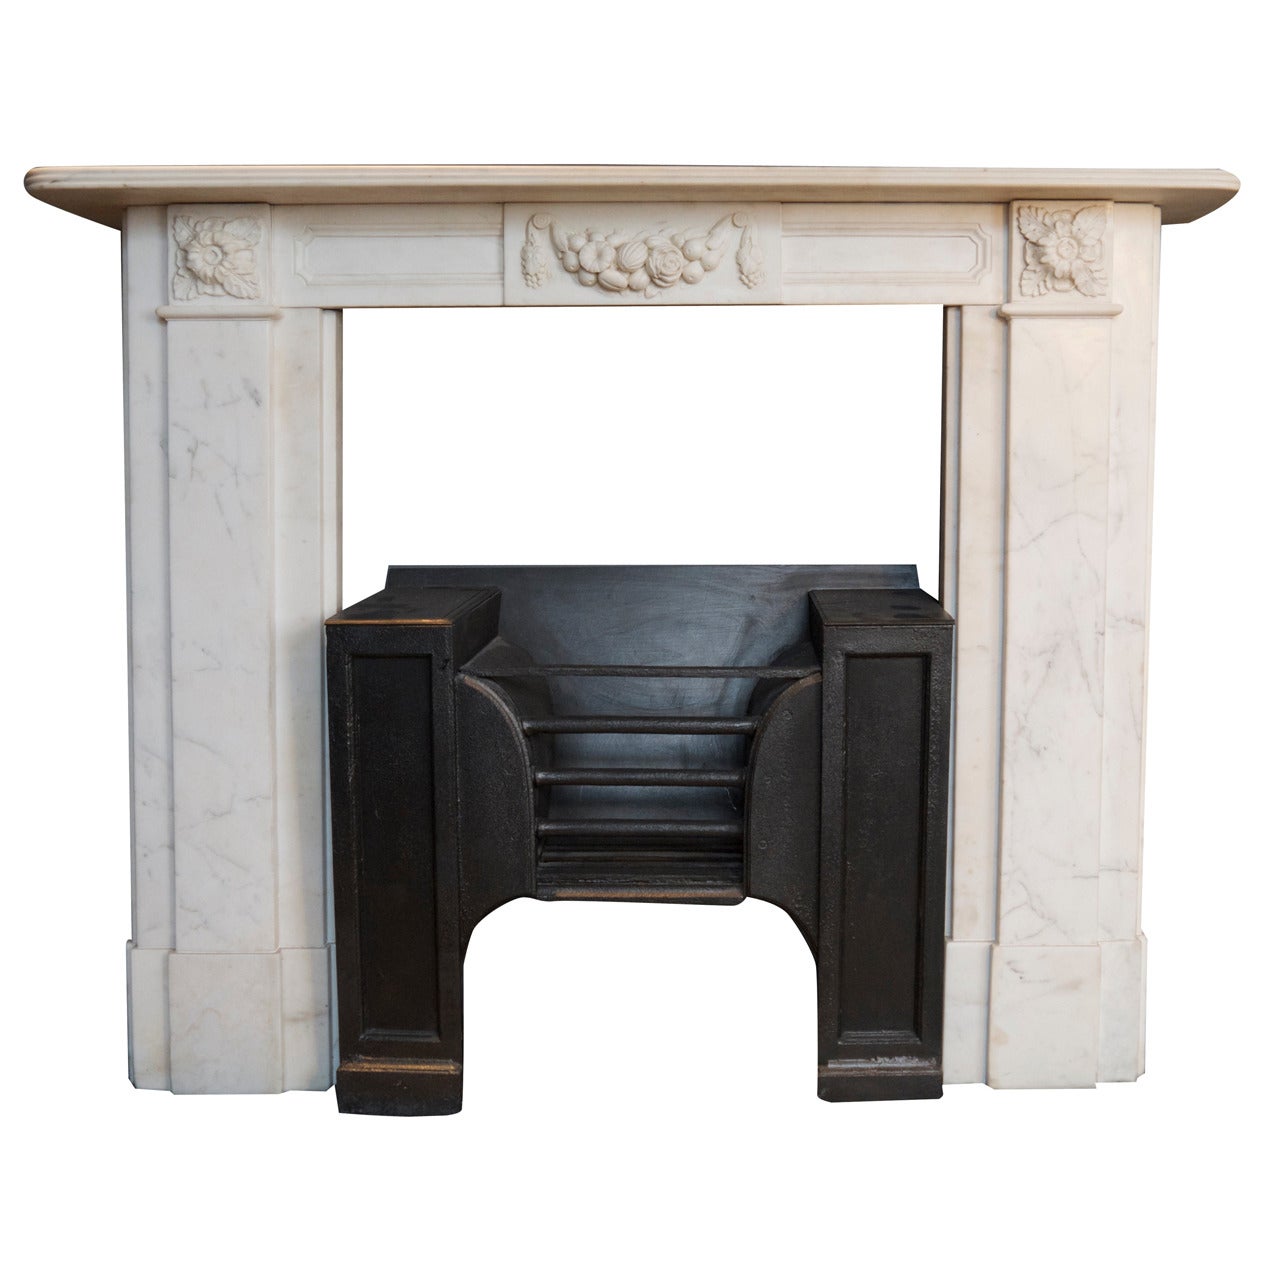 Antique Georgian Marble Fireplace Surround with an Original Hob Grate